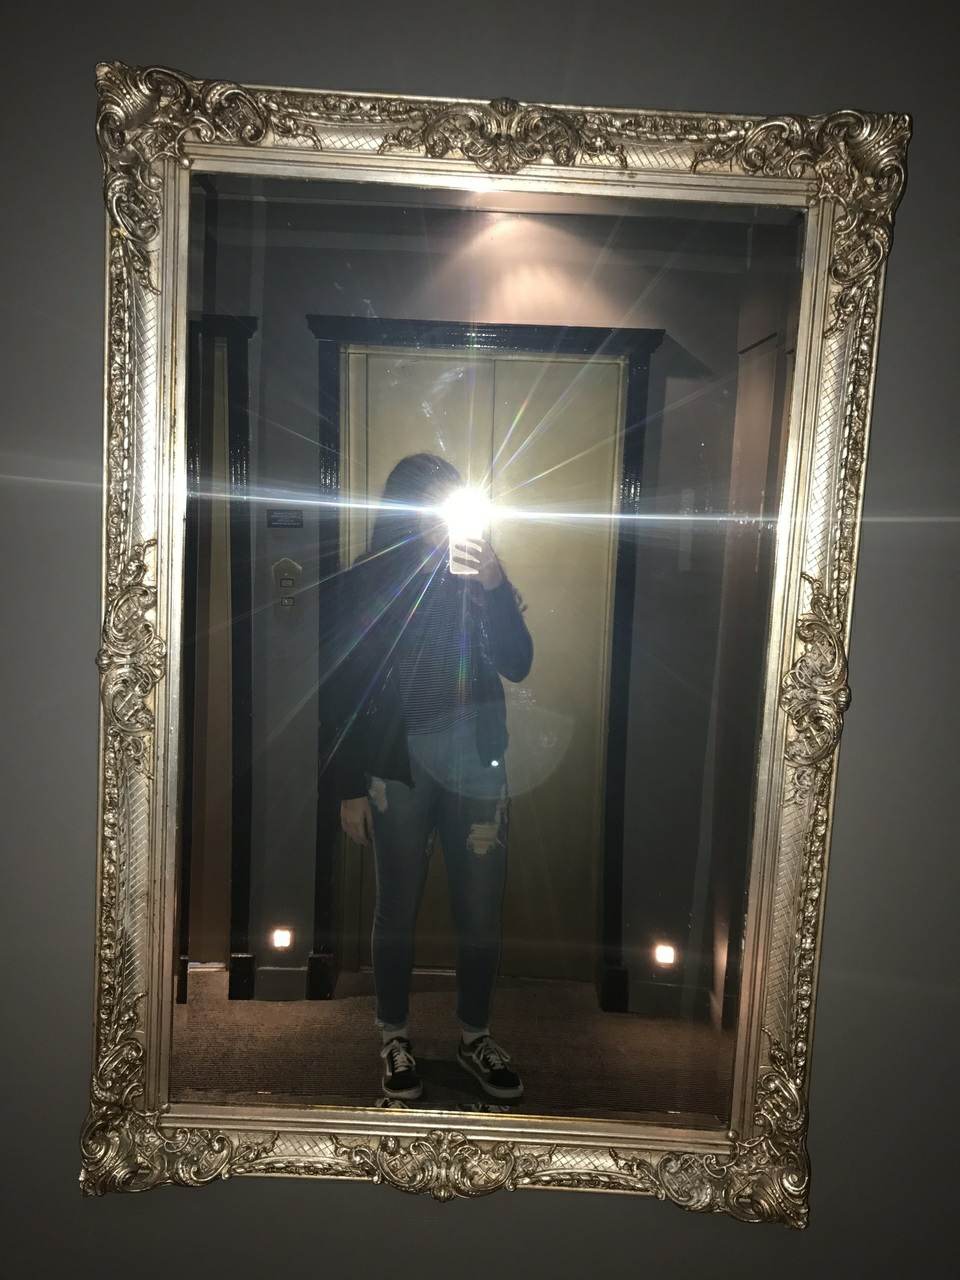 andy brandy recommends mirror selfie with flash pic